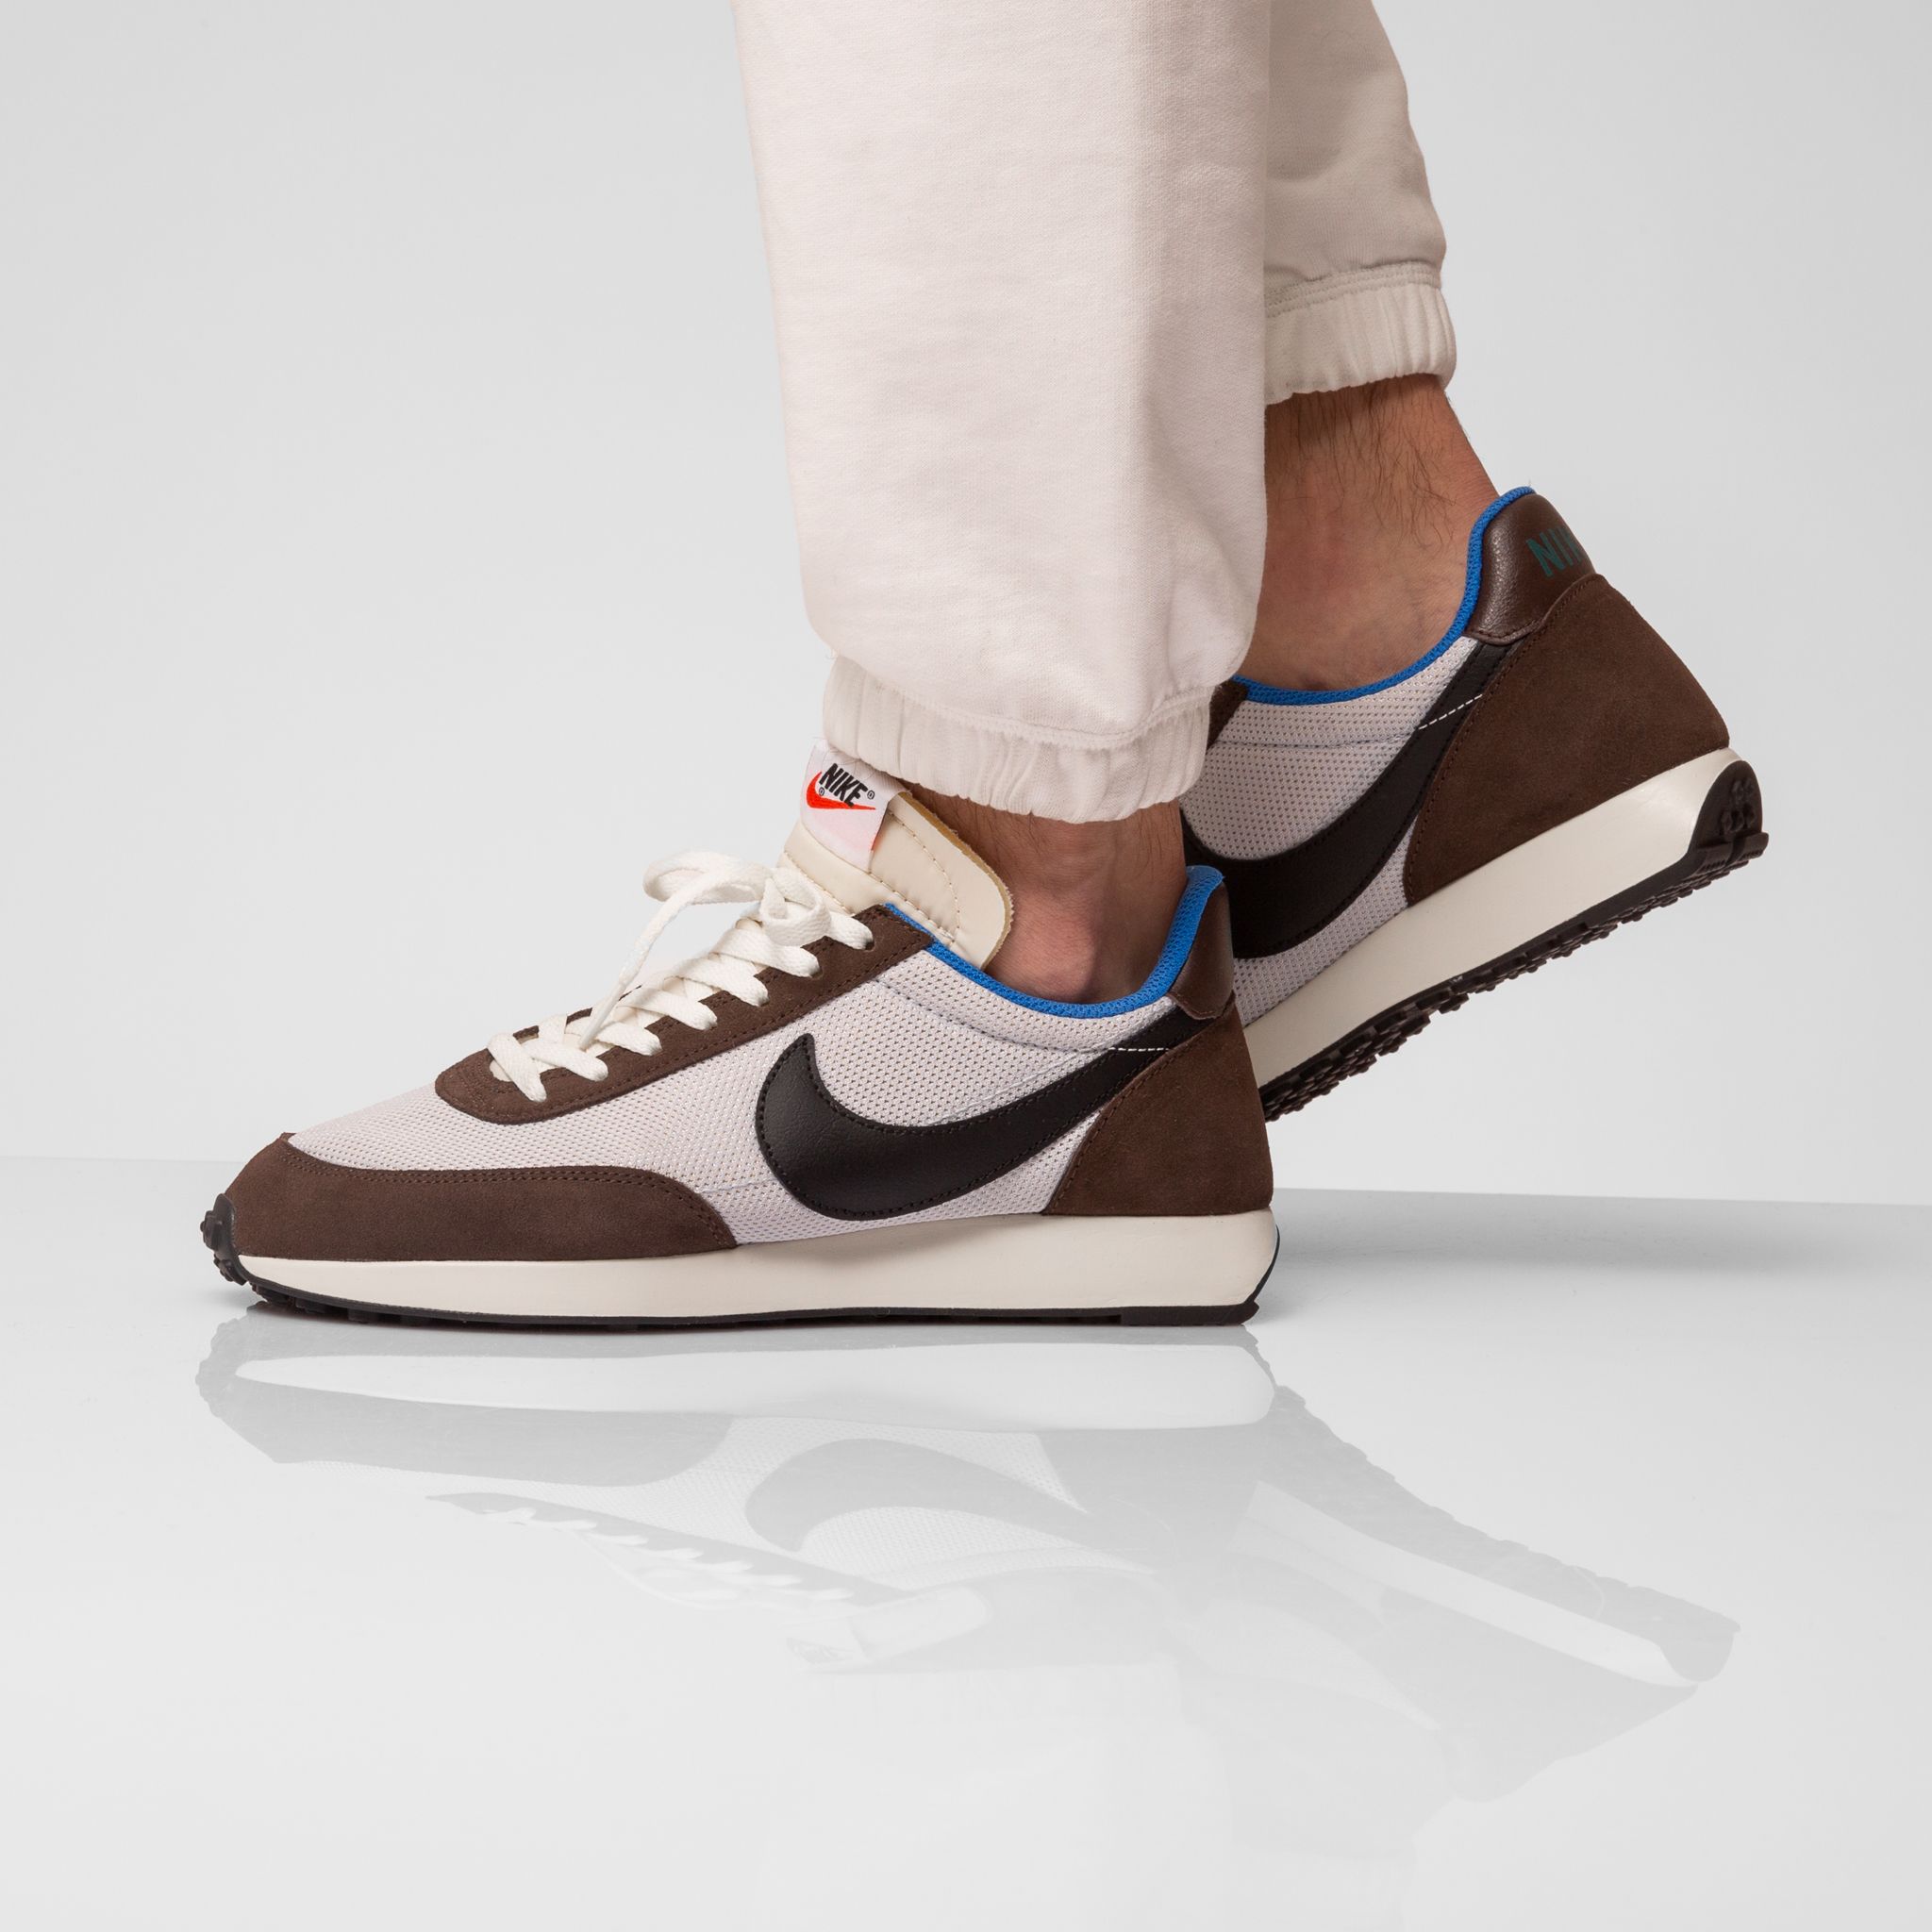 JustFreshKicks on Twitter: "UNDER RETAIL Nike Air Tailwind 79 'Baroque  Brown' $63.32 + shipping (retail $90) Use code EXTRA15 in cart =&gt;  https://t.co/TCAvwzsbMP https://t.co/0a4kmAiHL0" / Twitter